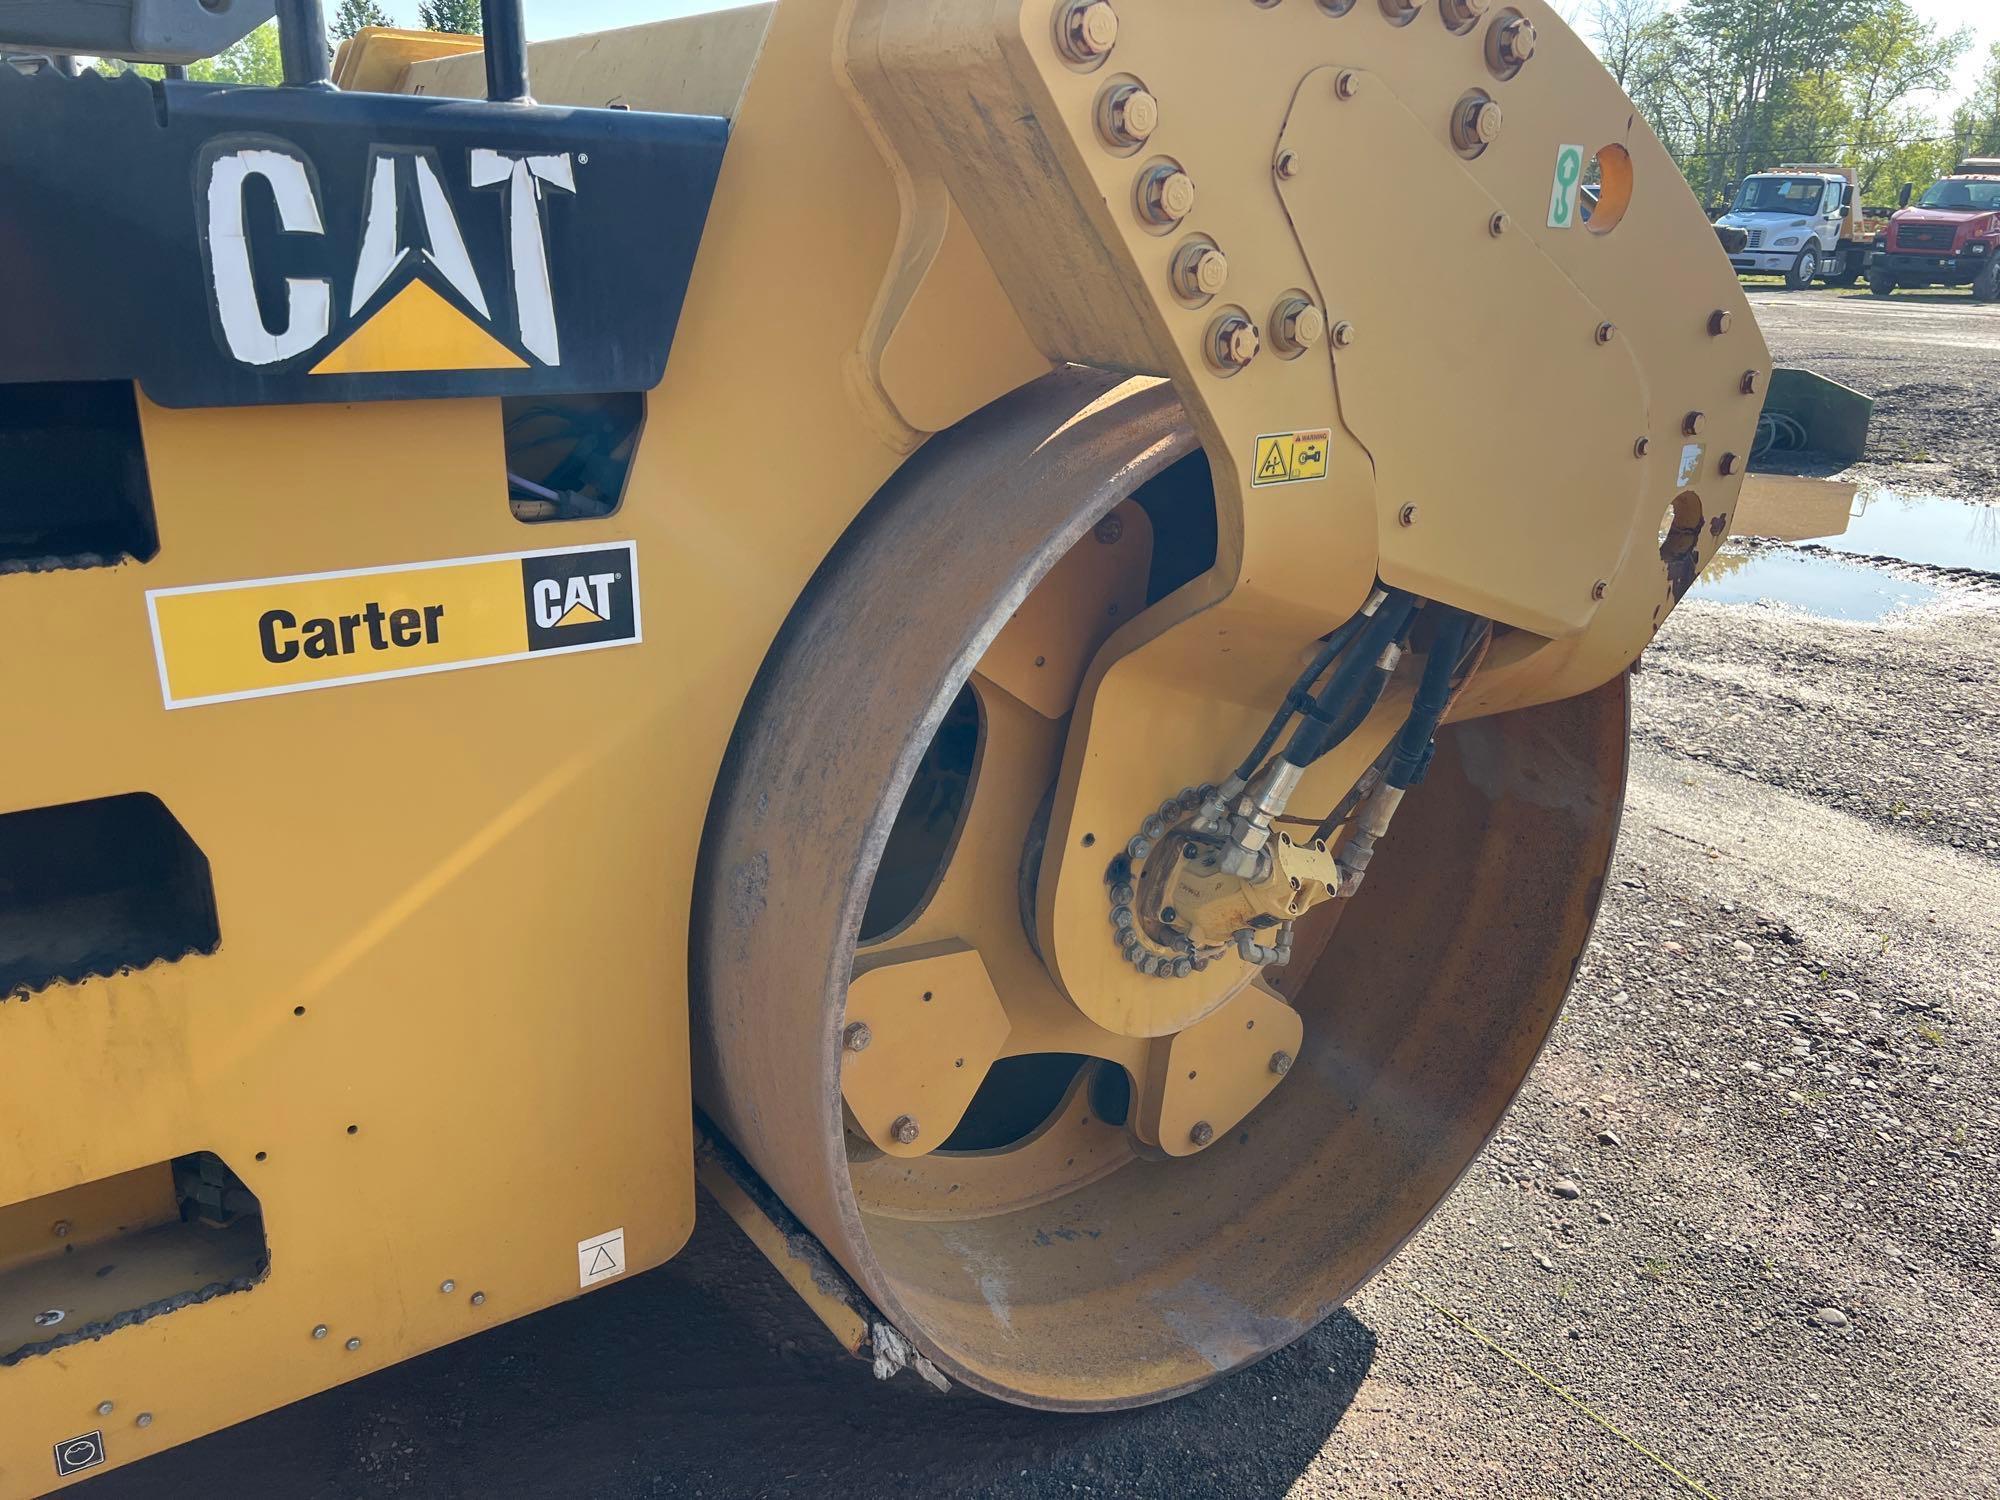 2014 CAT CB64R9 ASPHALT ROLLER SN:CB500161 powered by Cat diesel engine, equipped with OROPS, 79in.